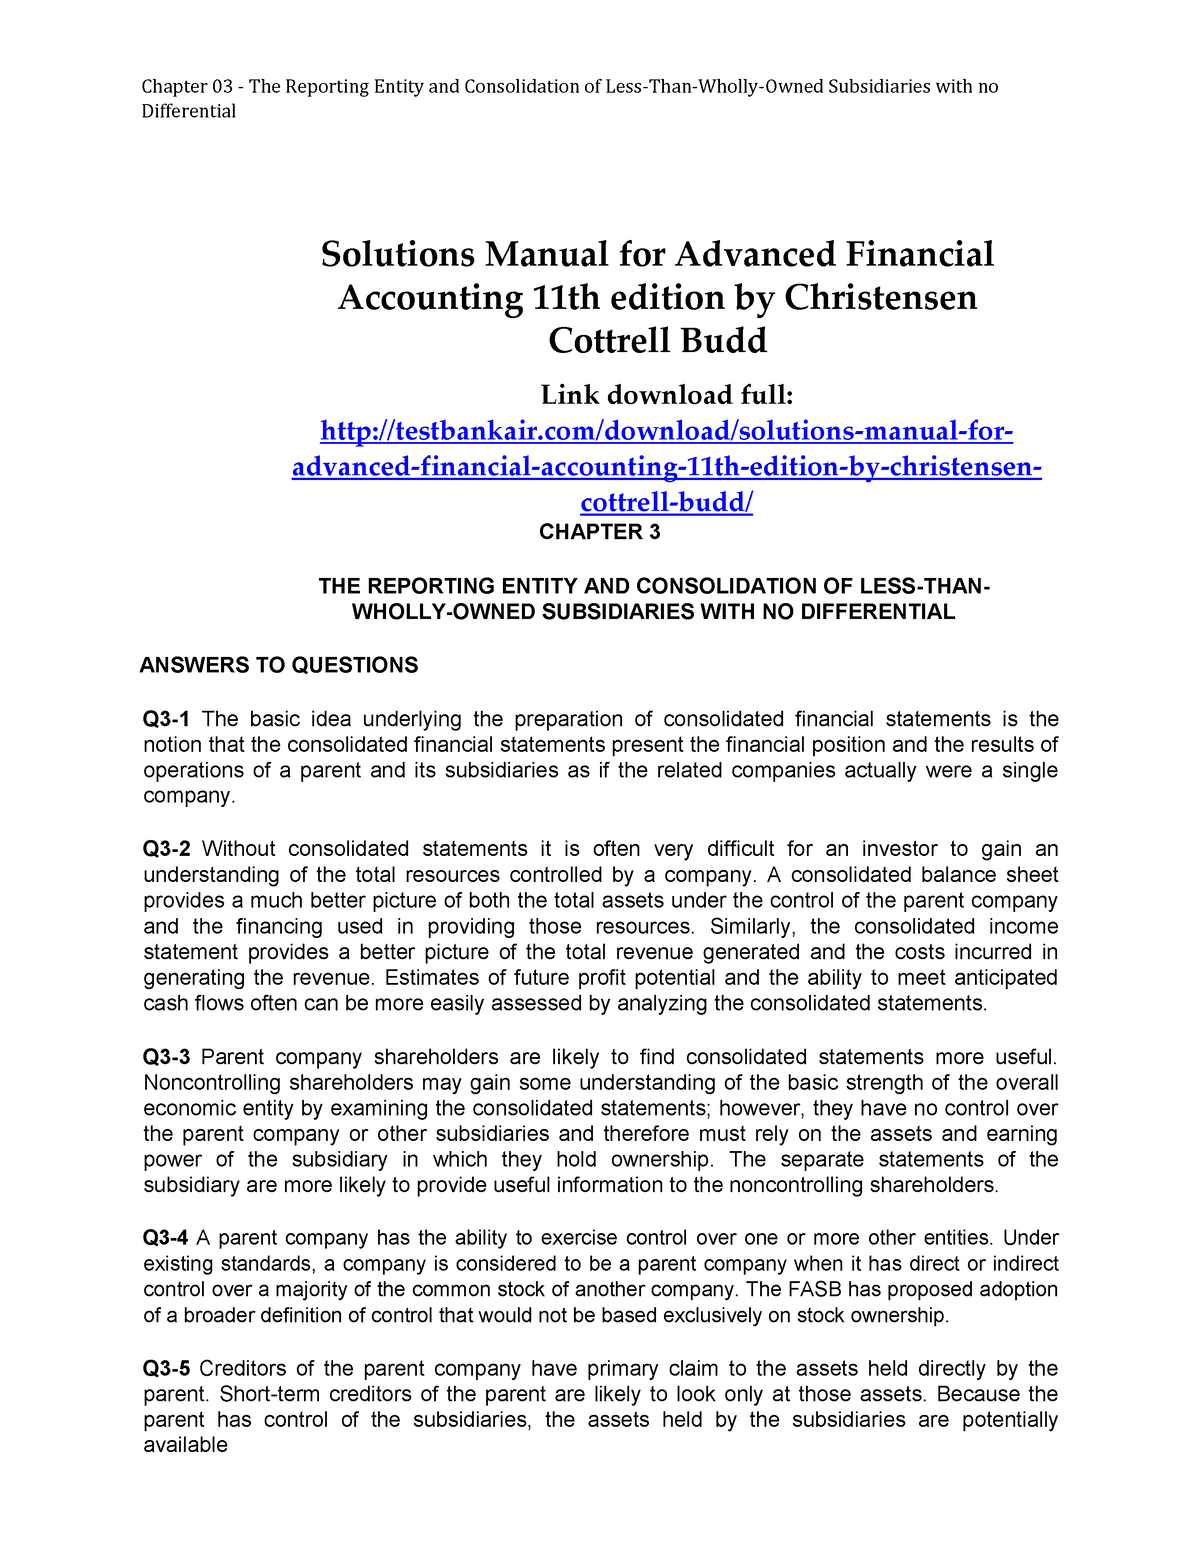 article review on advanced financial accounting